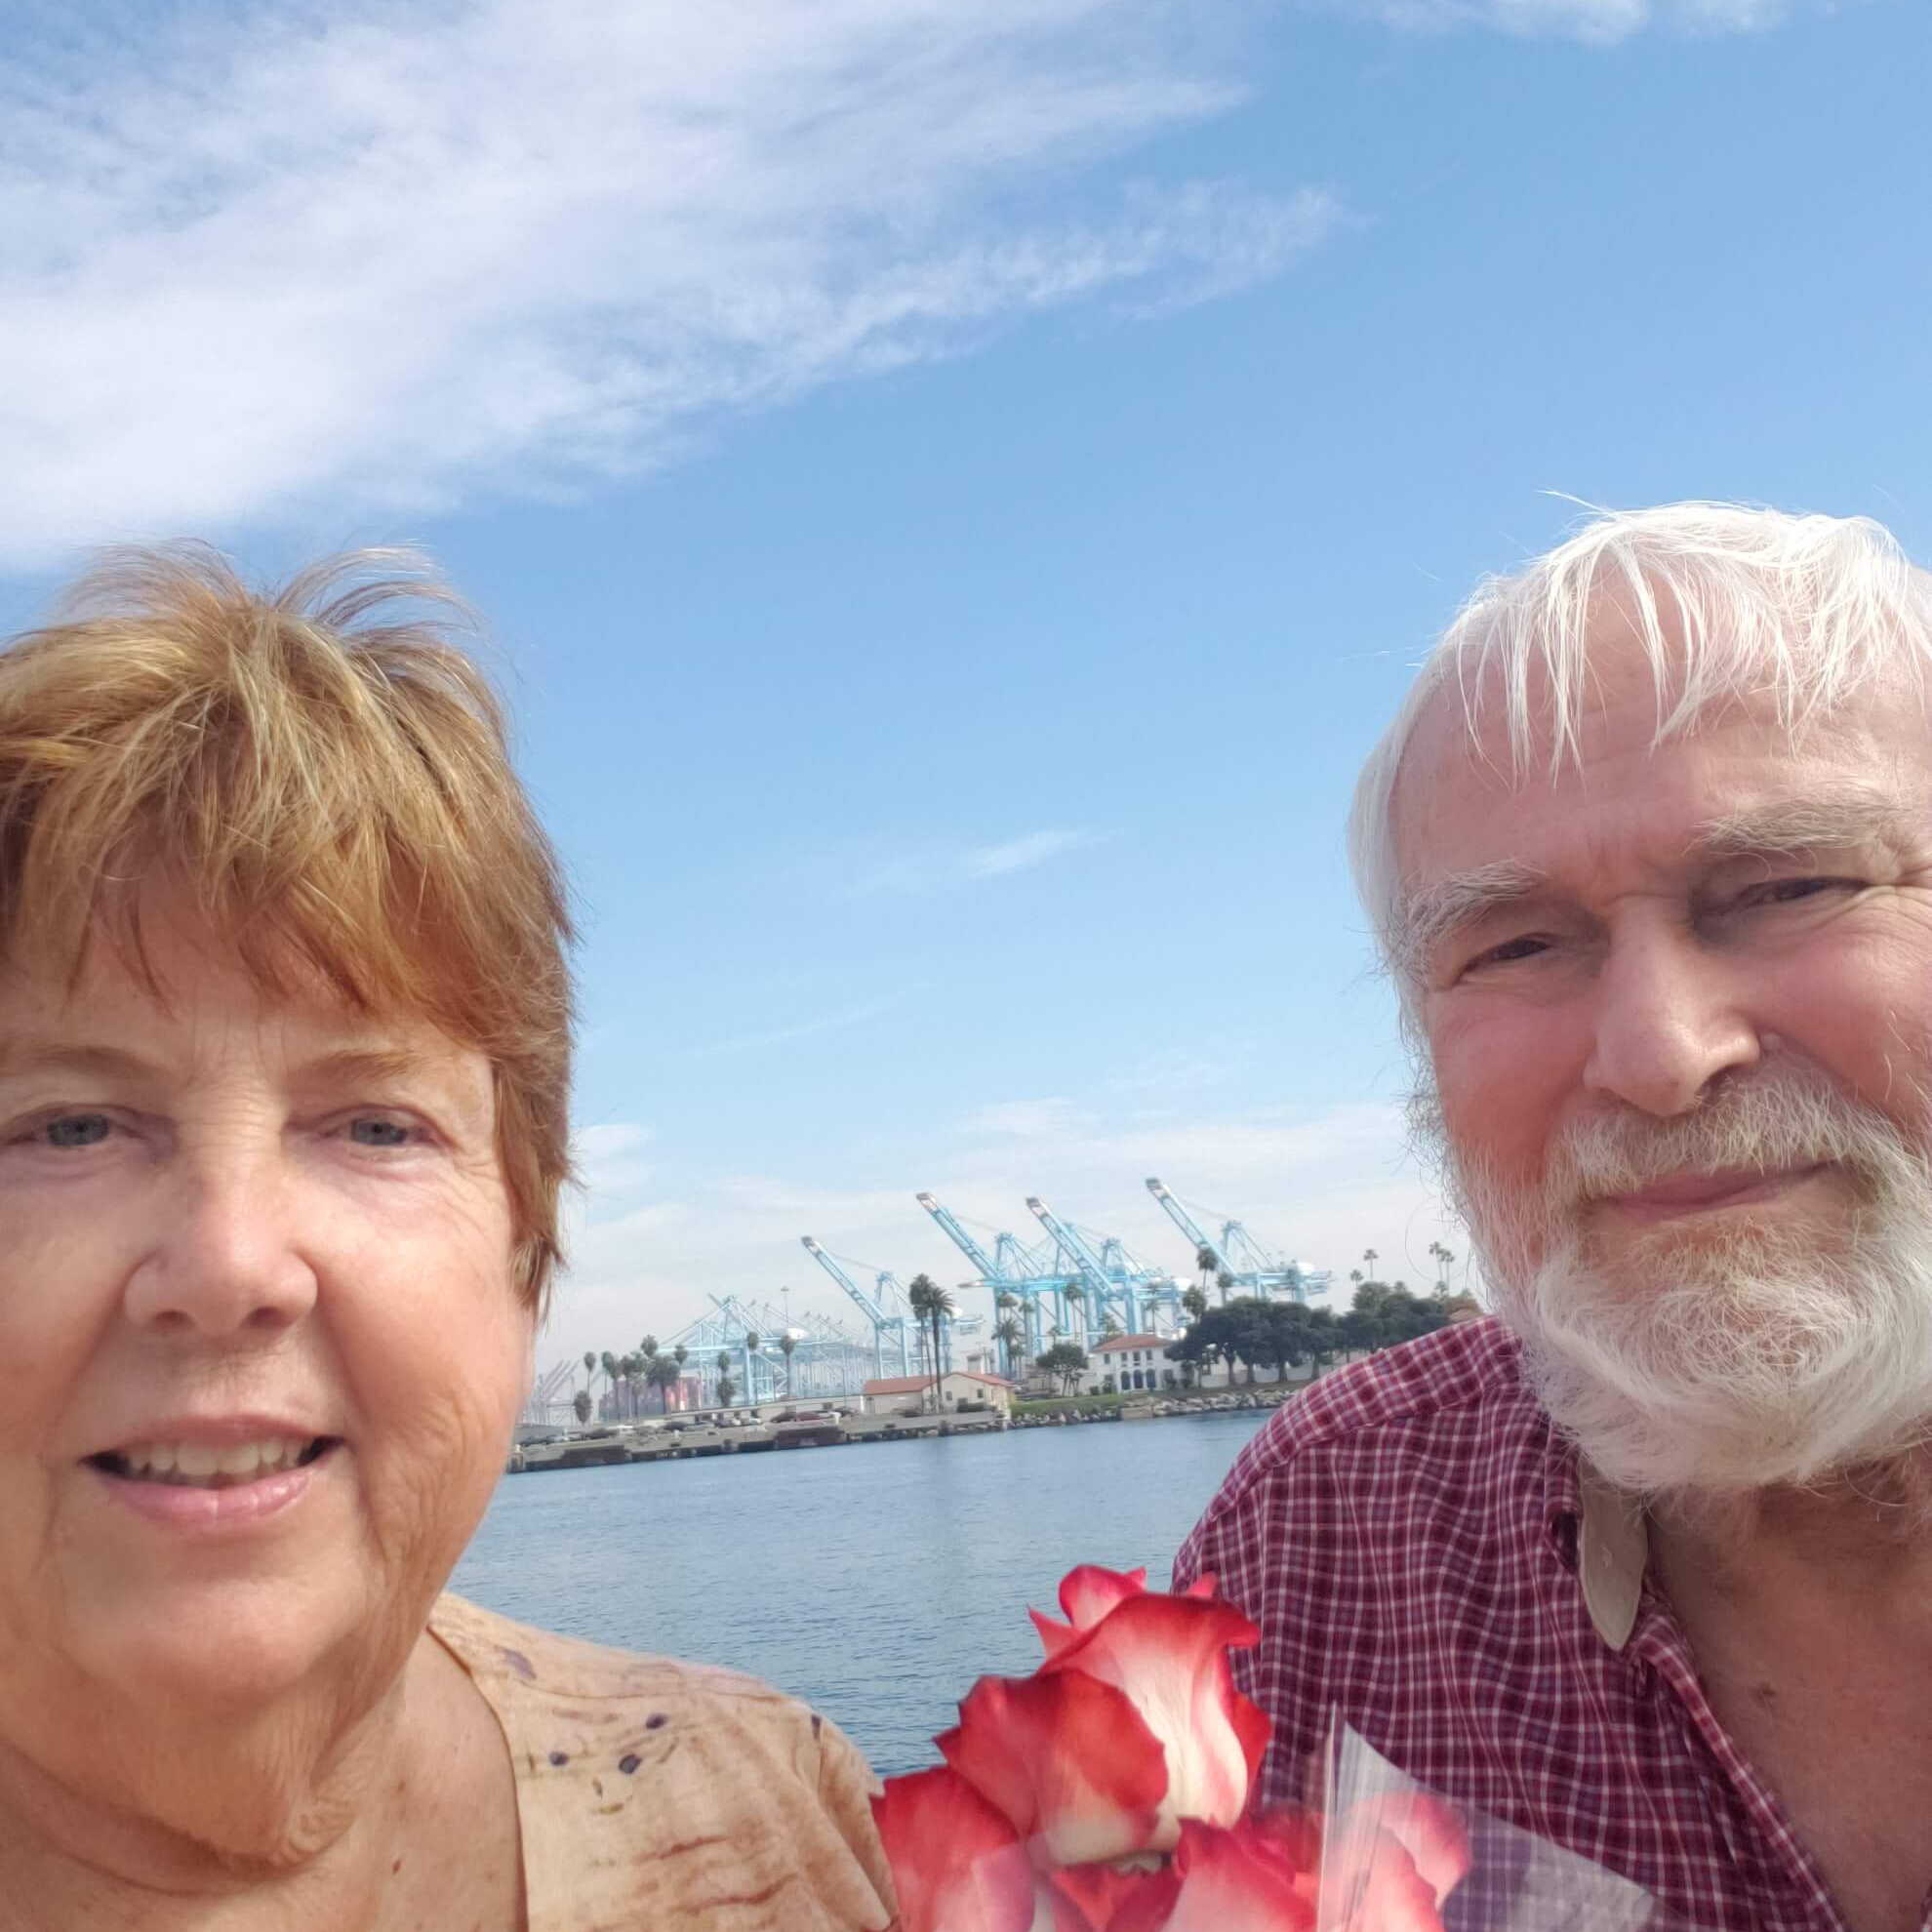 Ruth and Stjepan with Roses at the Pier